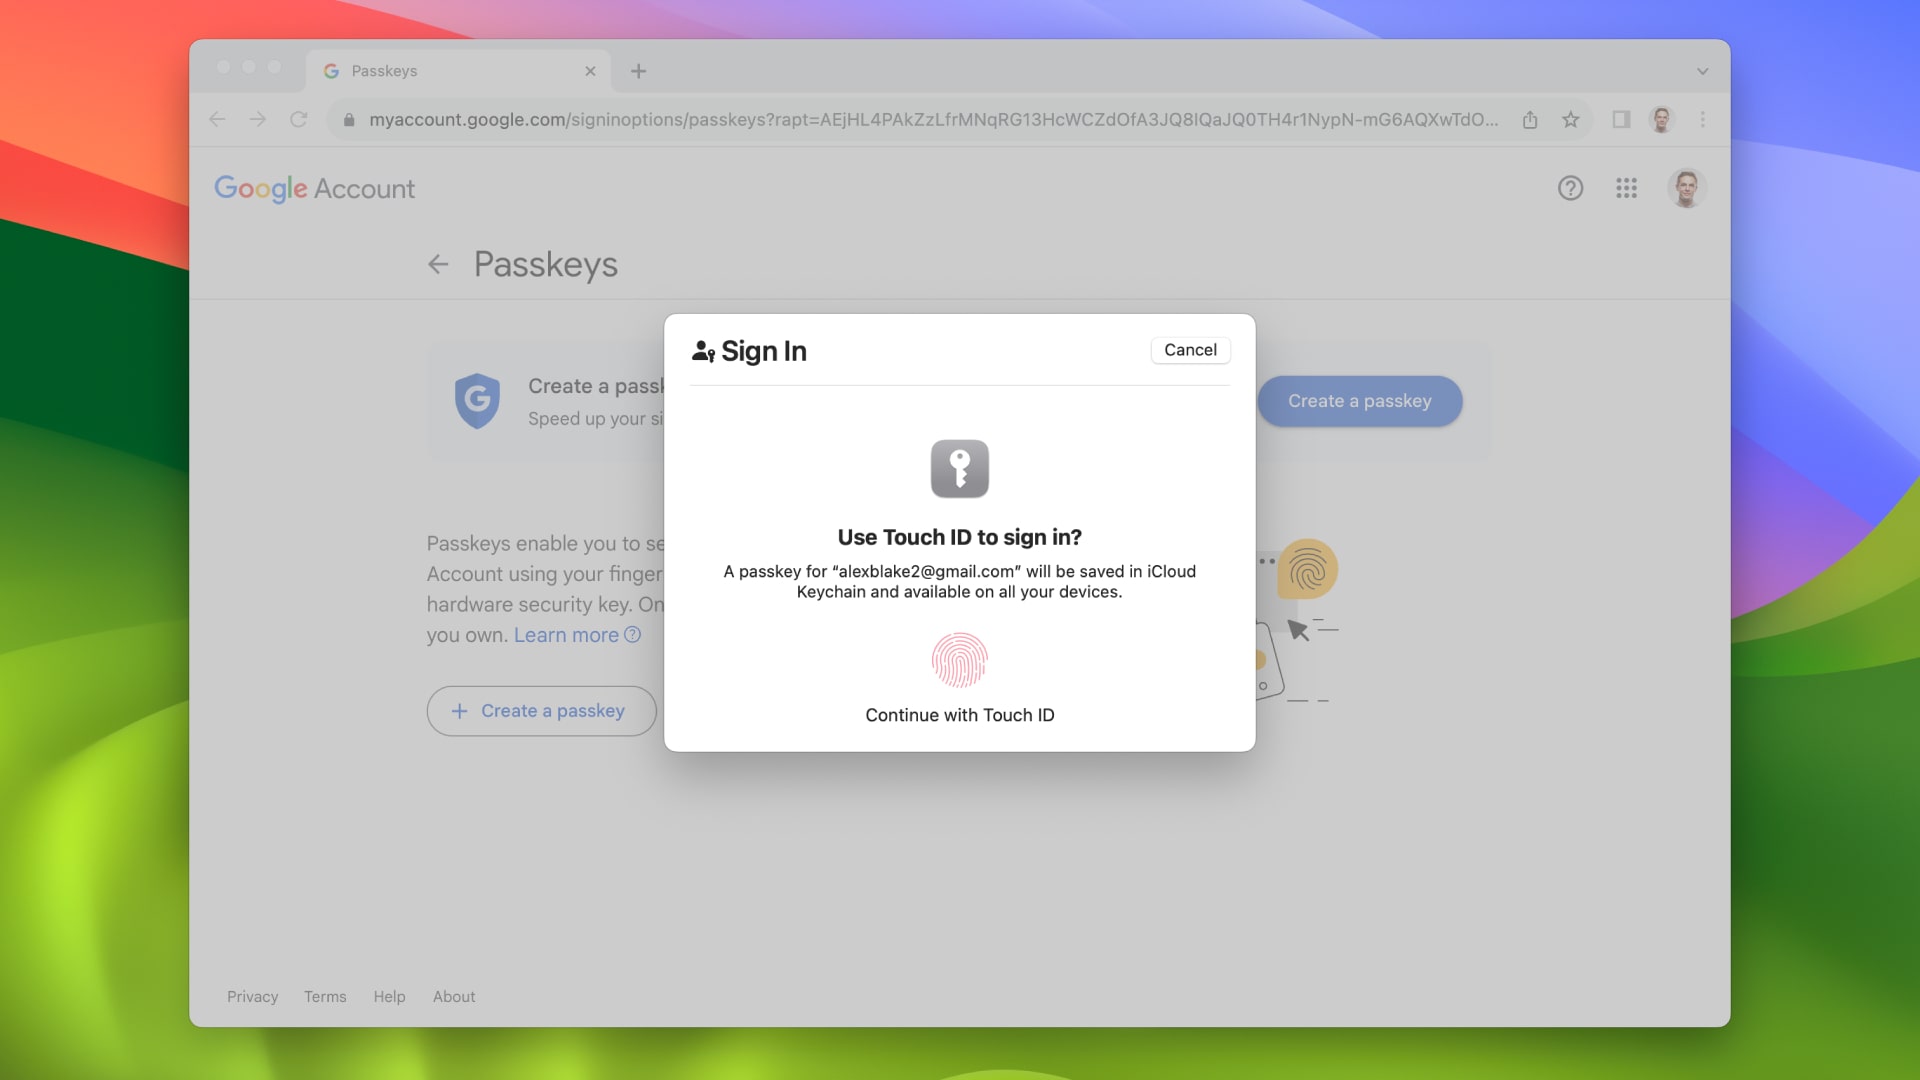 A Google account page where a passkey is being created. The user is being prompted to use their fingerprint to secure their account.